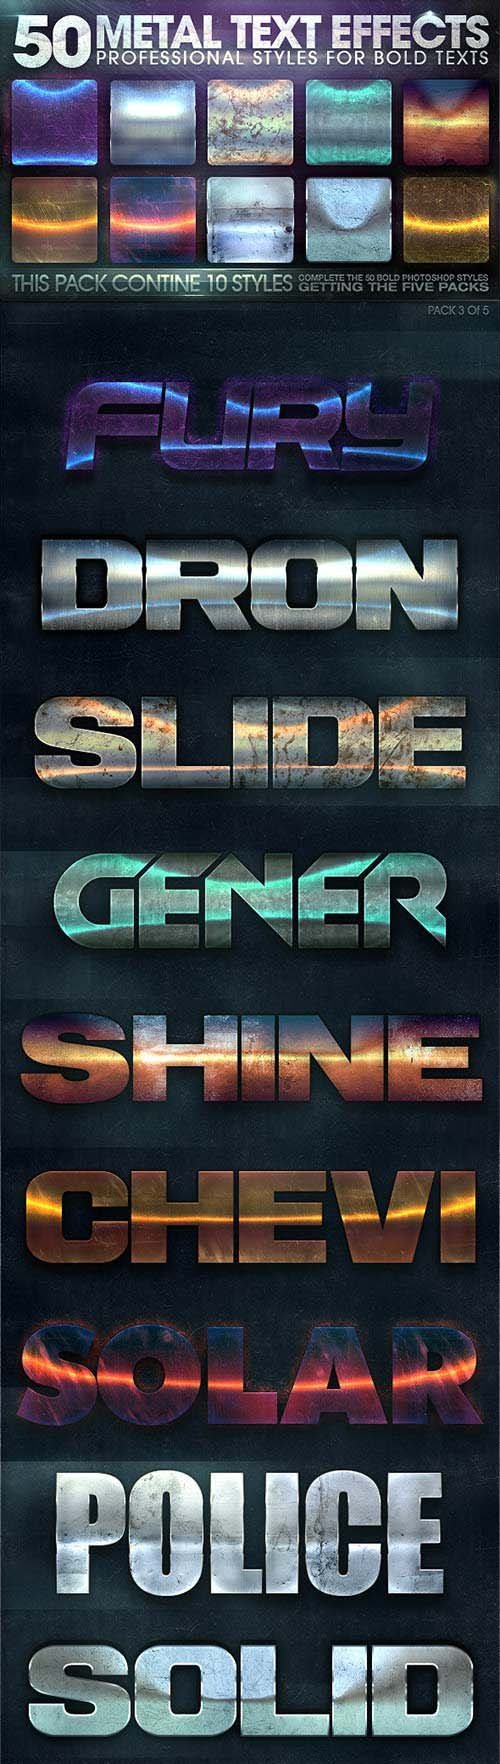 GraphicRiver - 50 Metal Text Effects 3 of 5 10697920